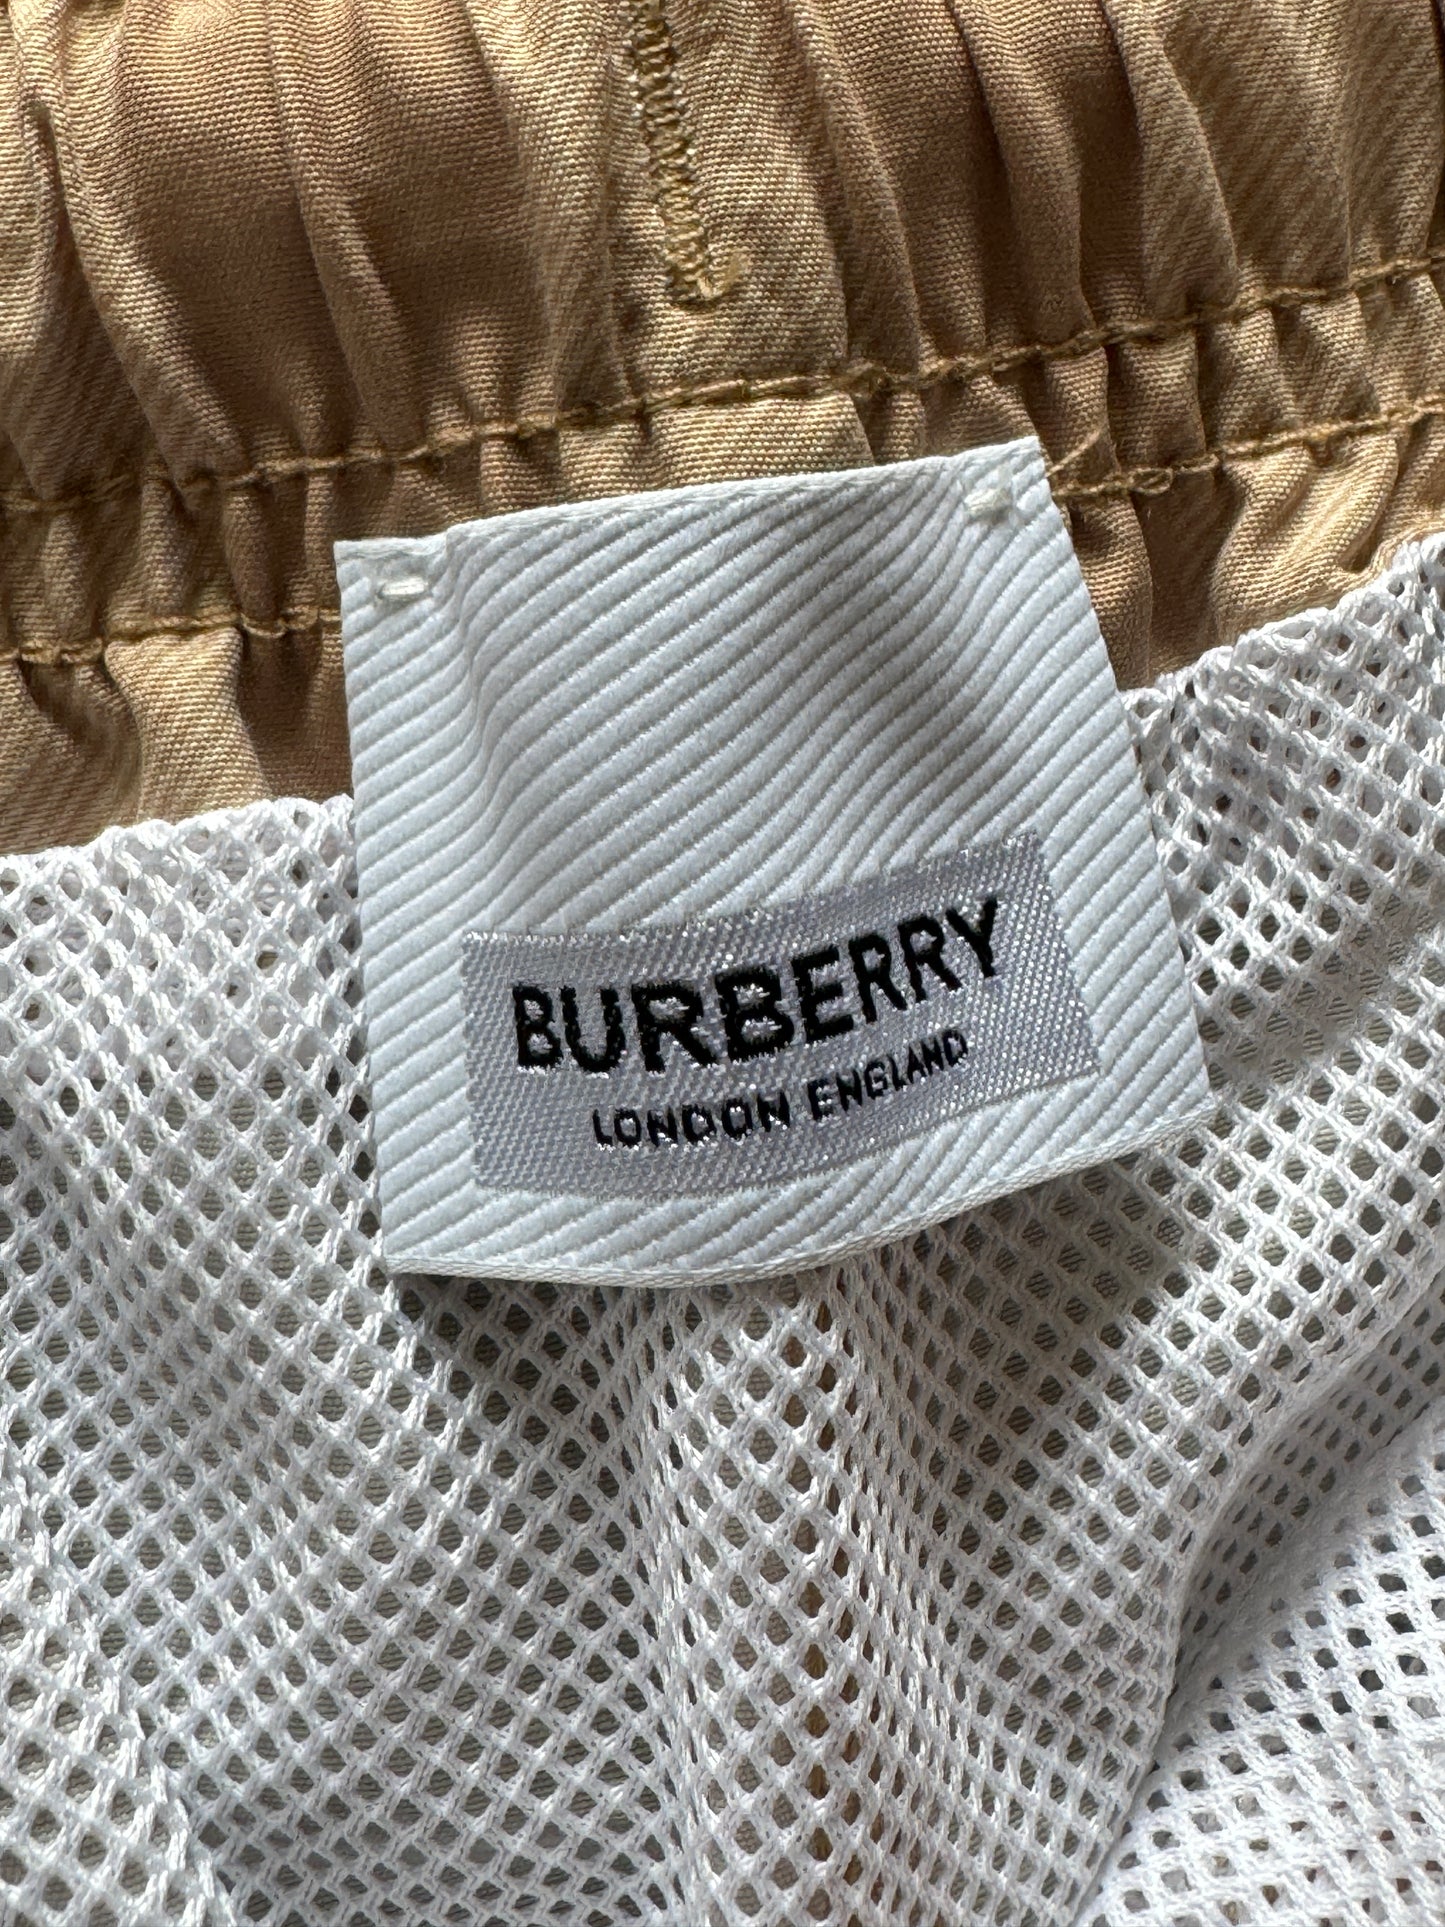 BURBERRY SOFT FAWN SWIMSHORTS